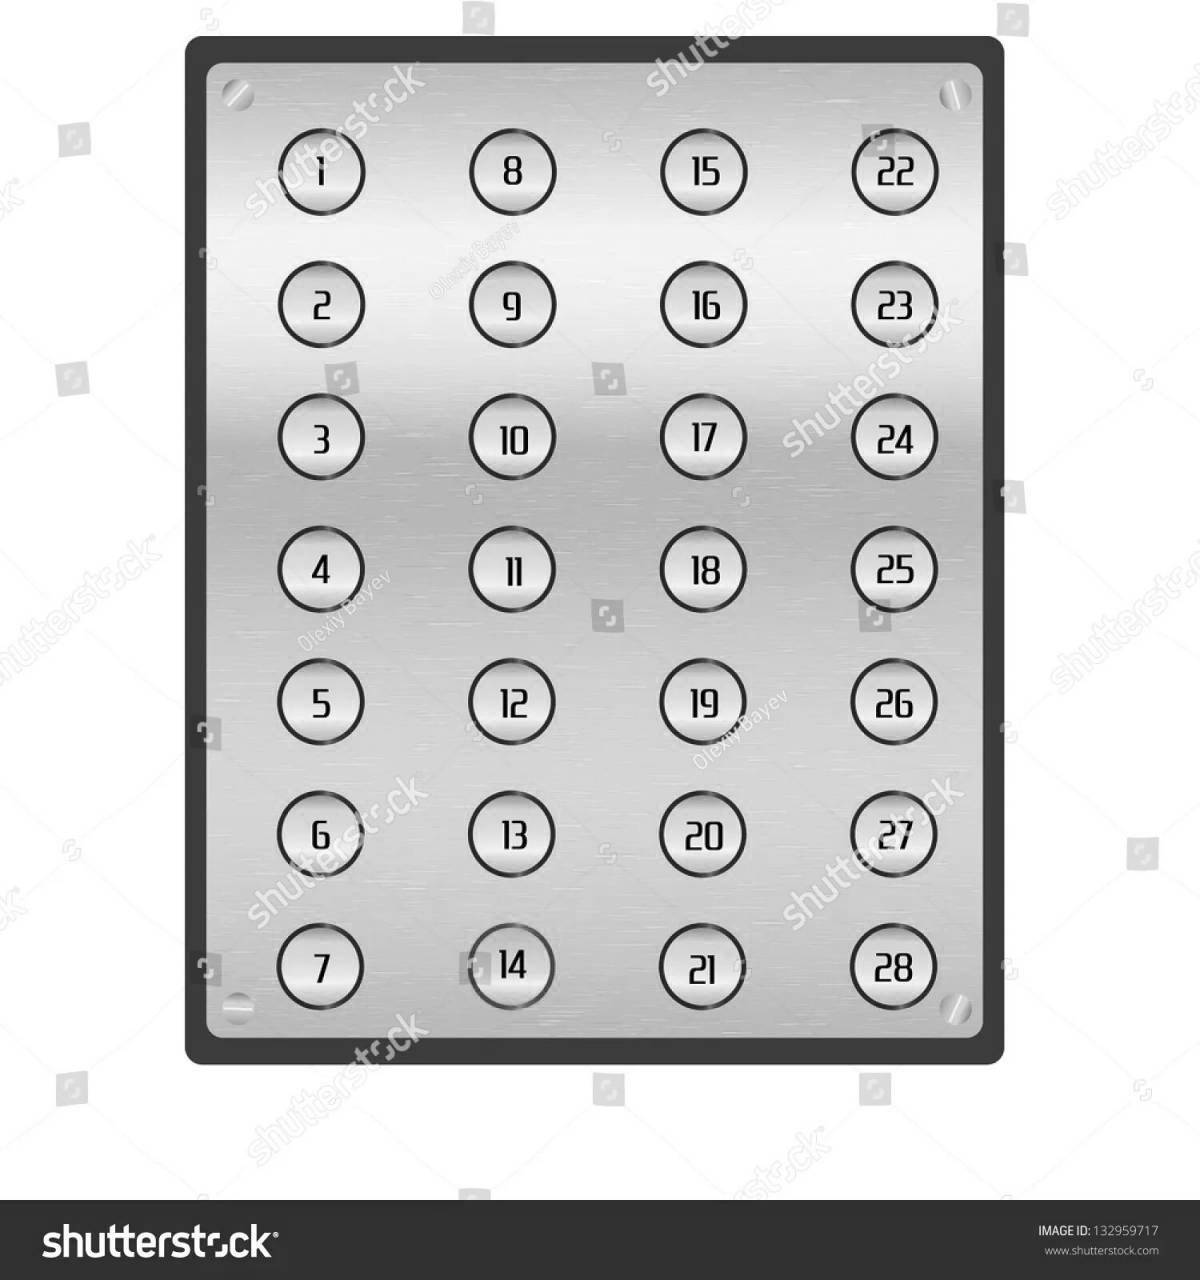 Exciting elevator button coloring pages